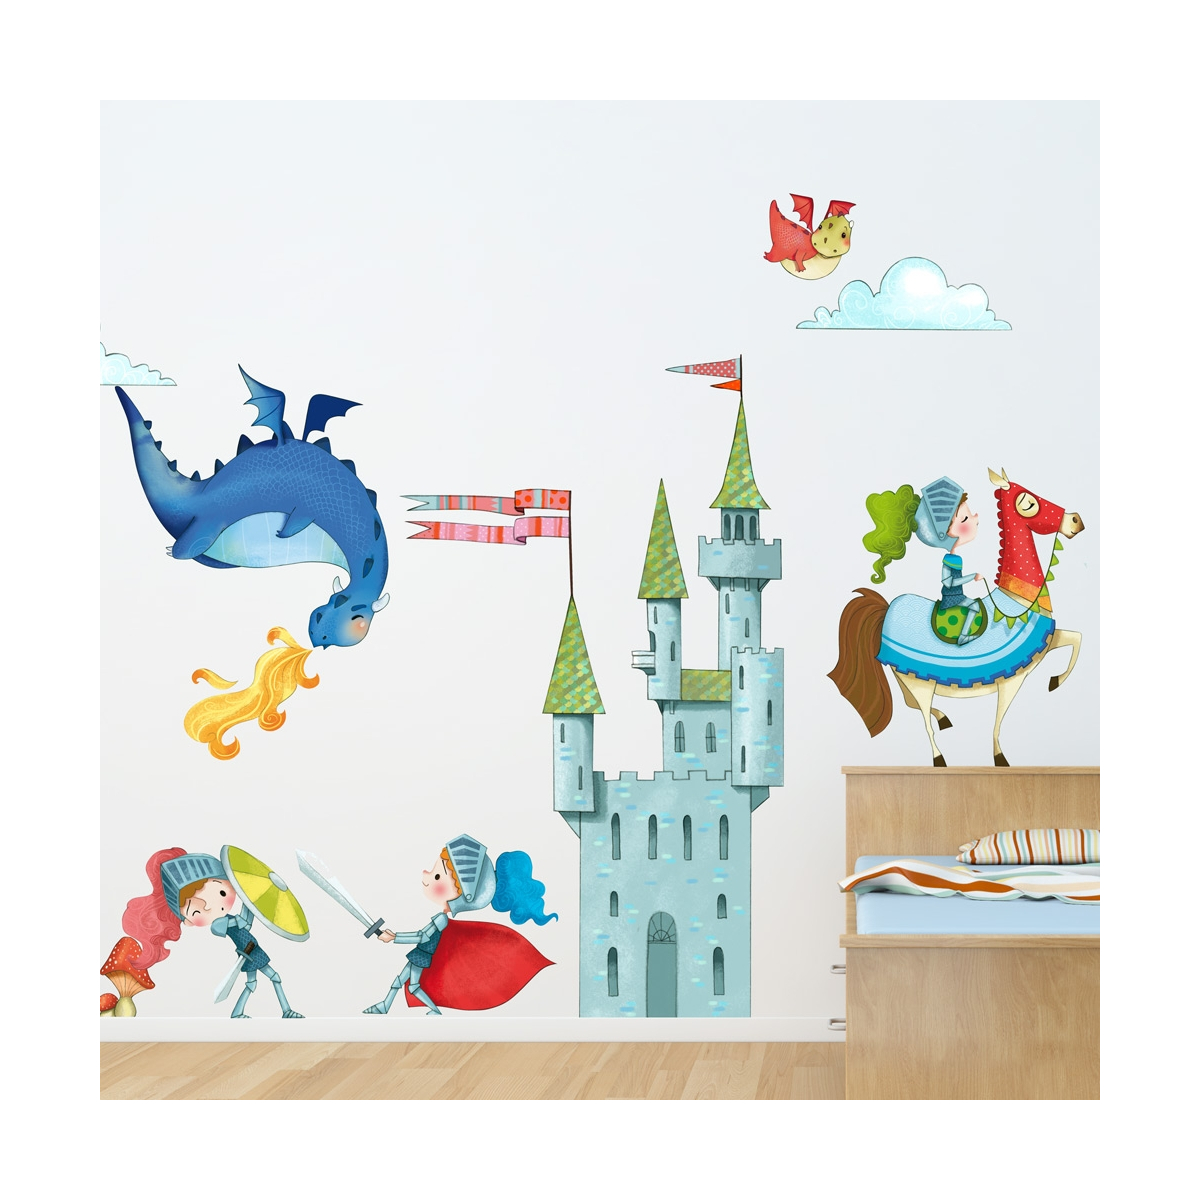 The Knights wall stickers